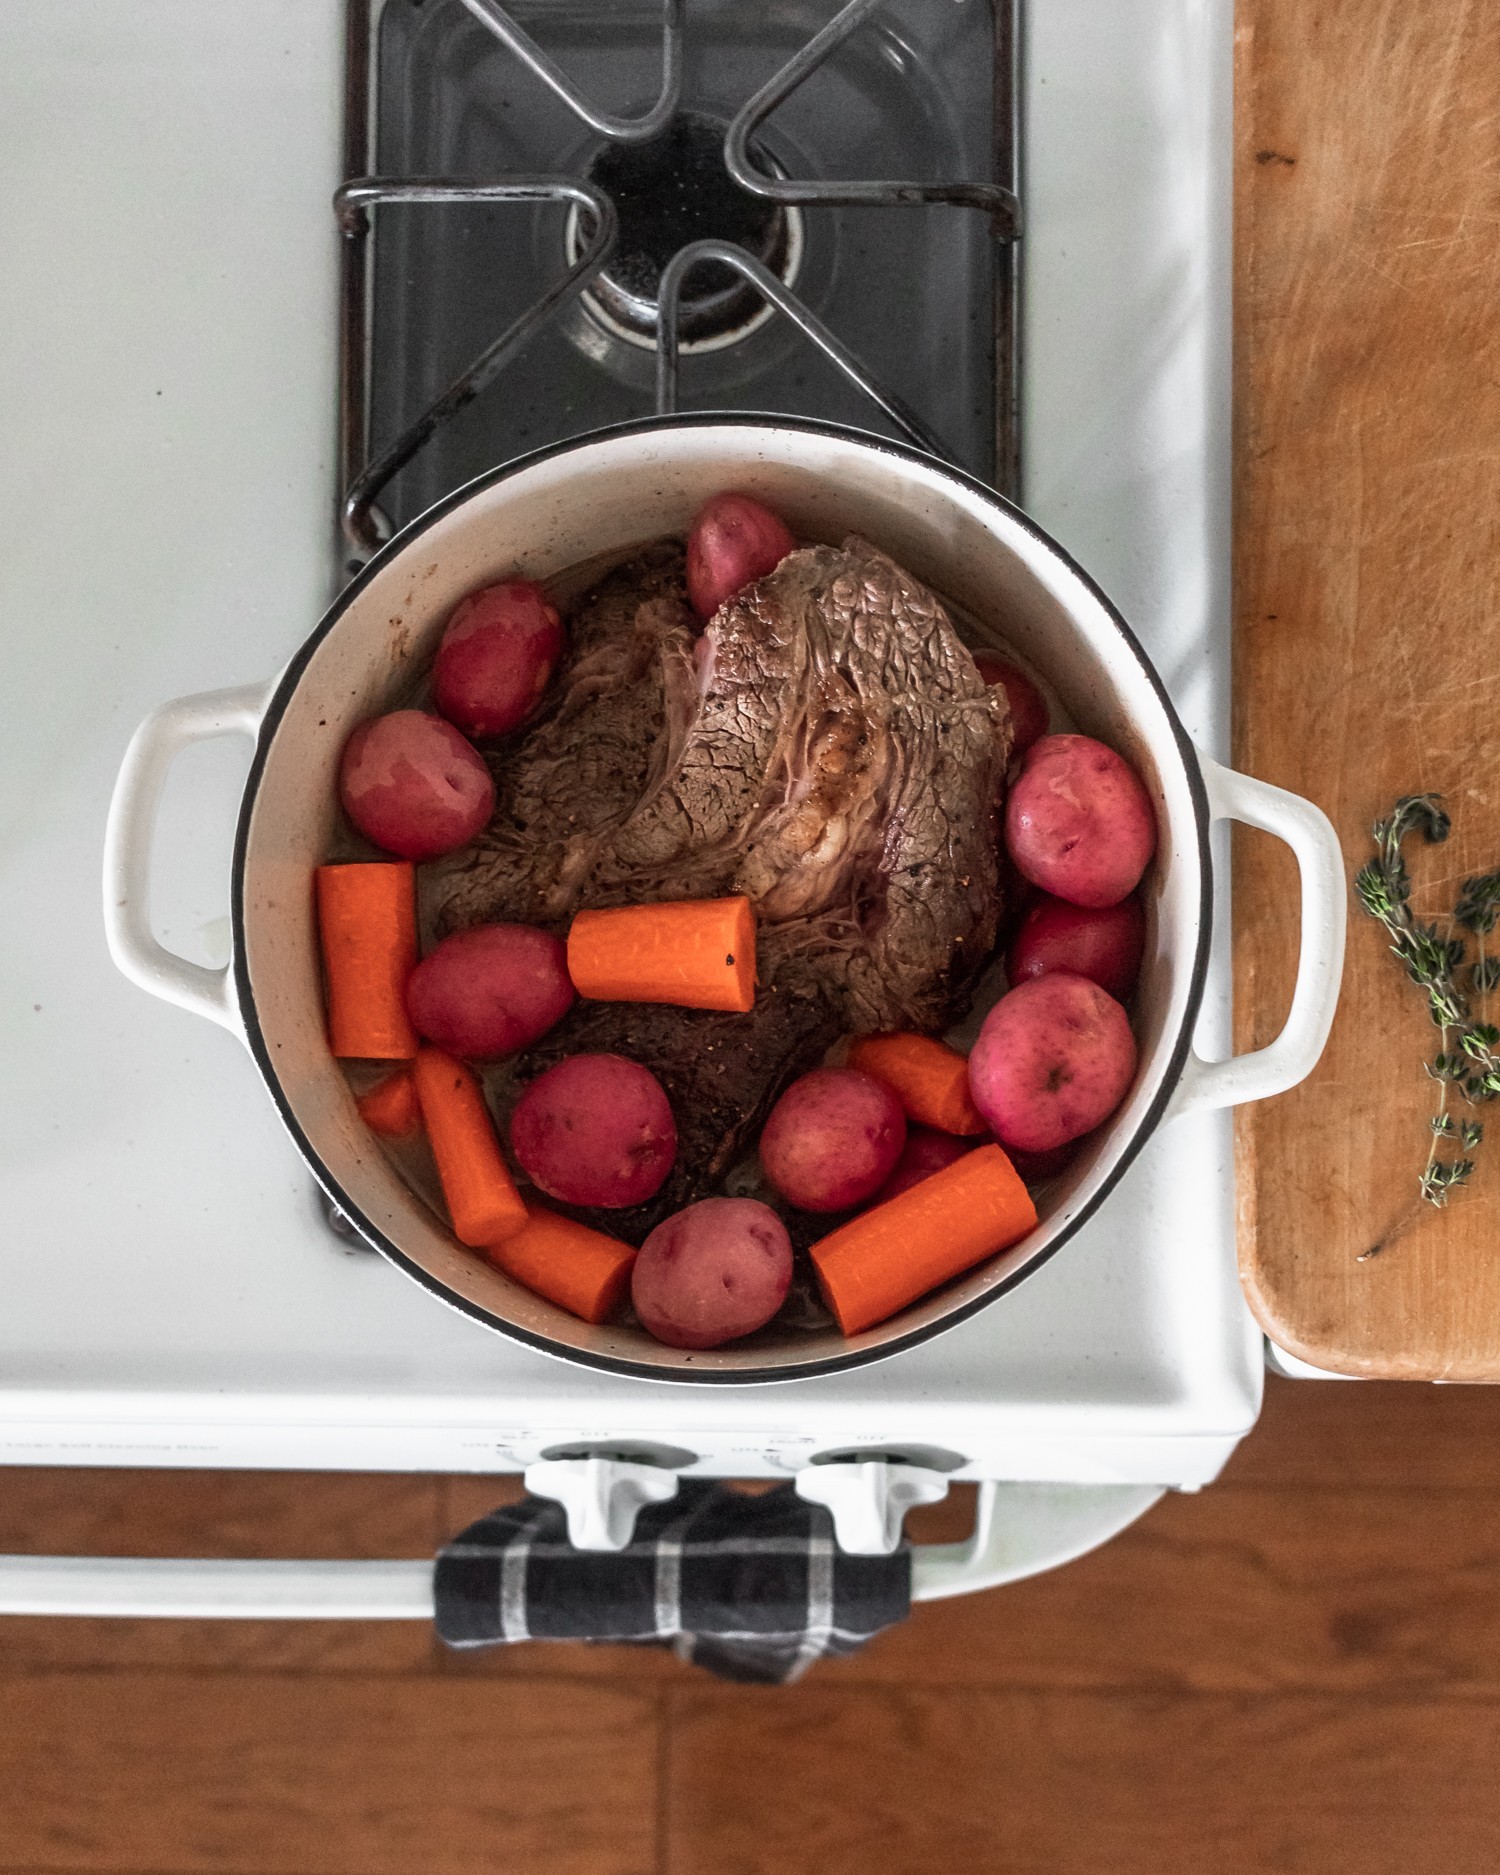 A Dutch oven filled with beef, potatoes, and carrots on a white stove.